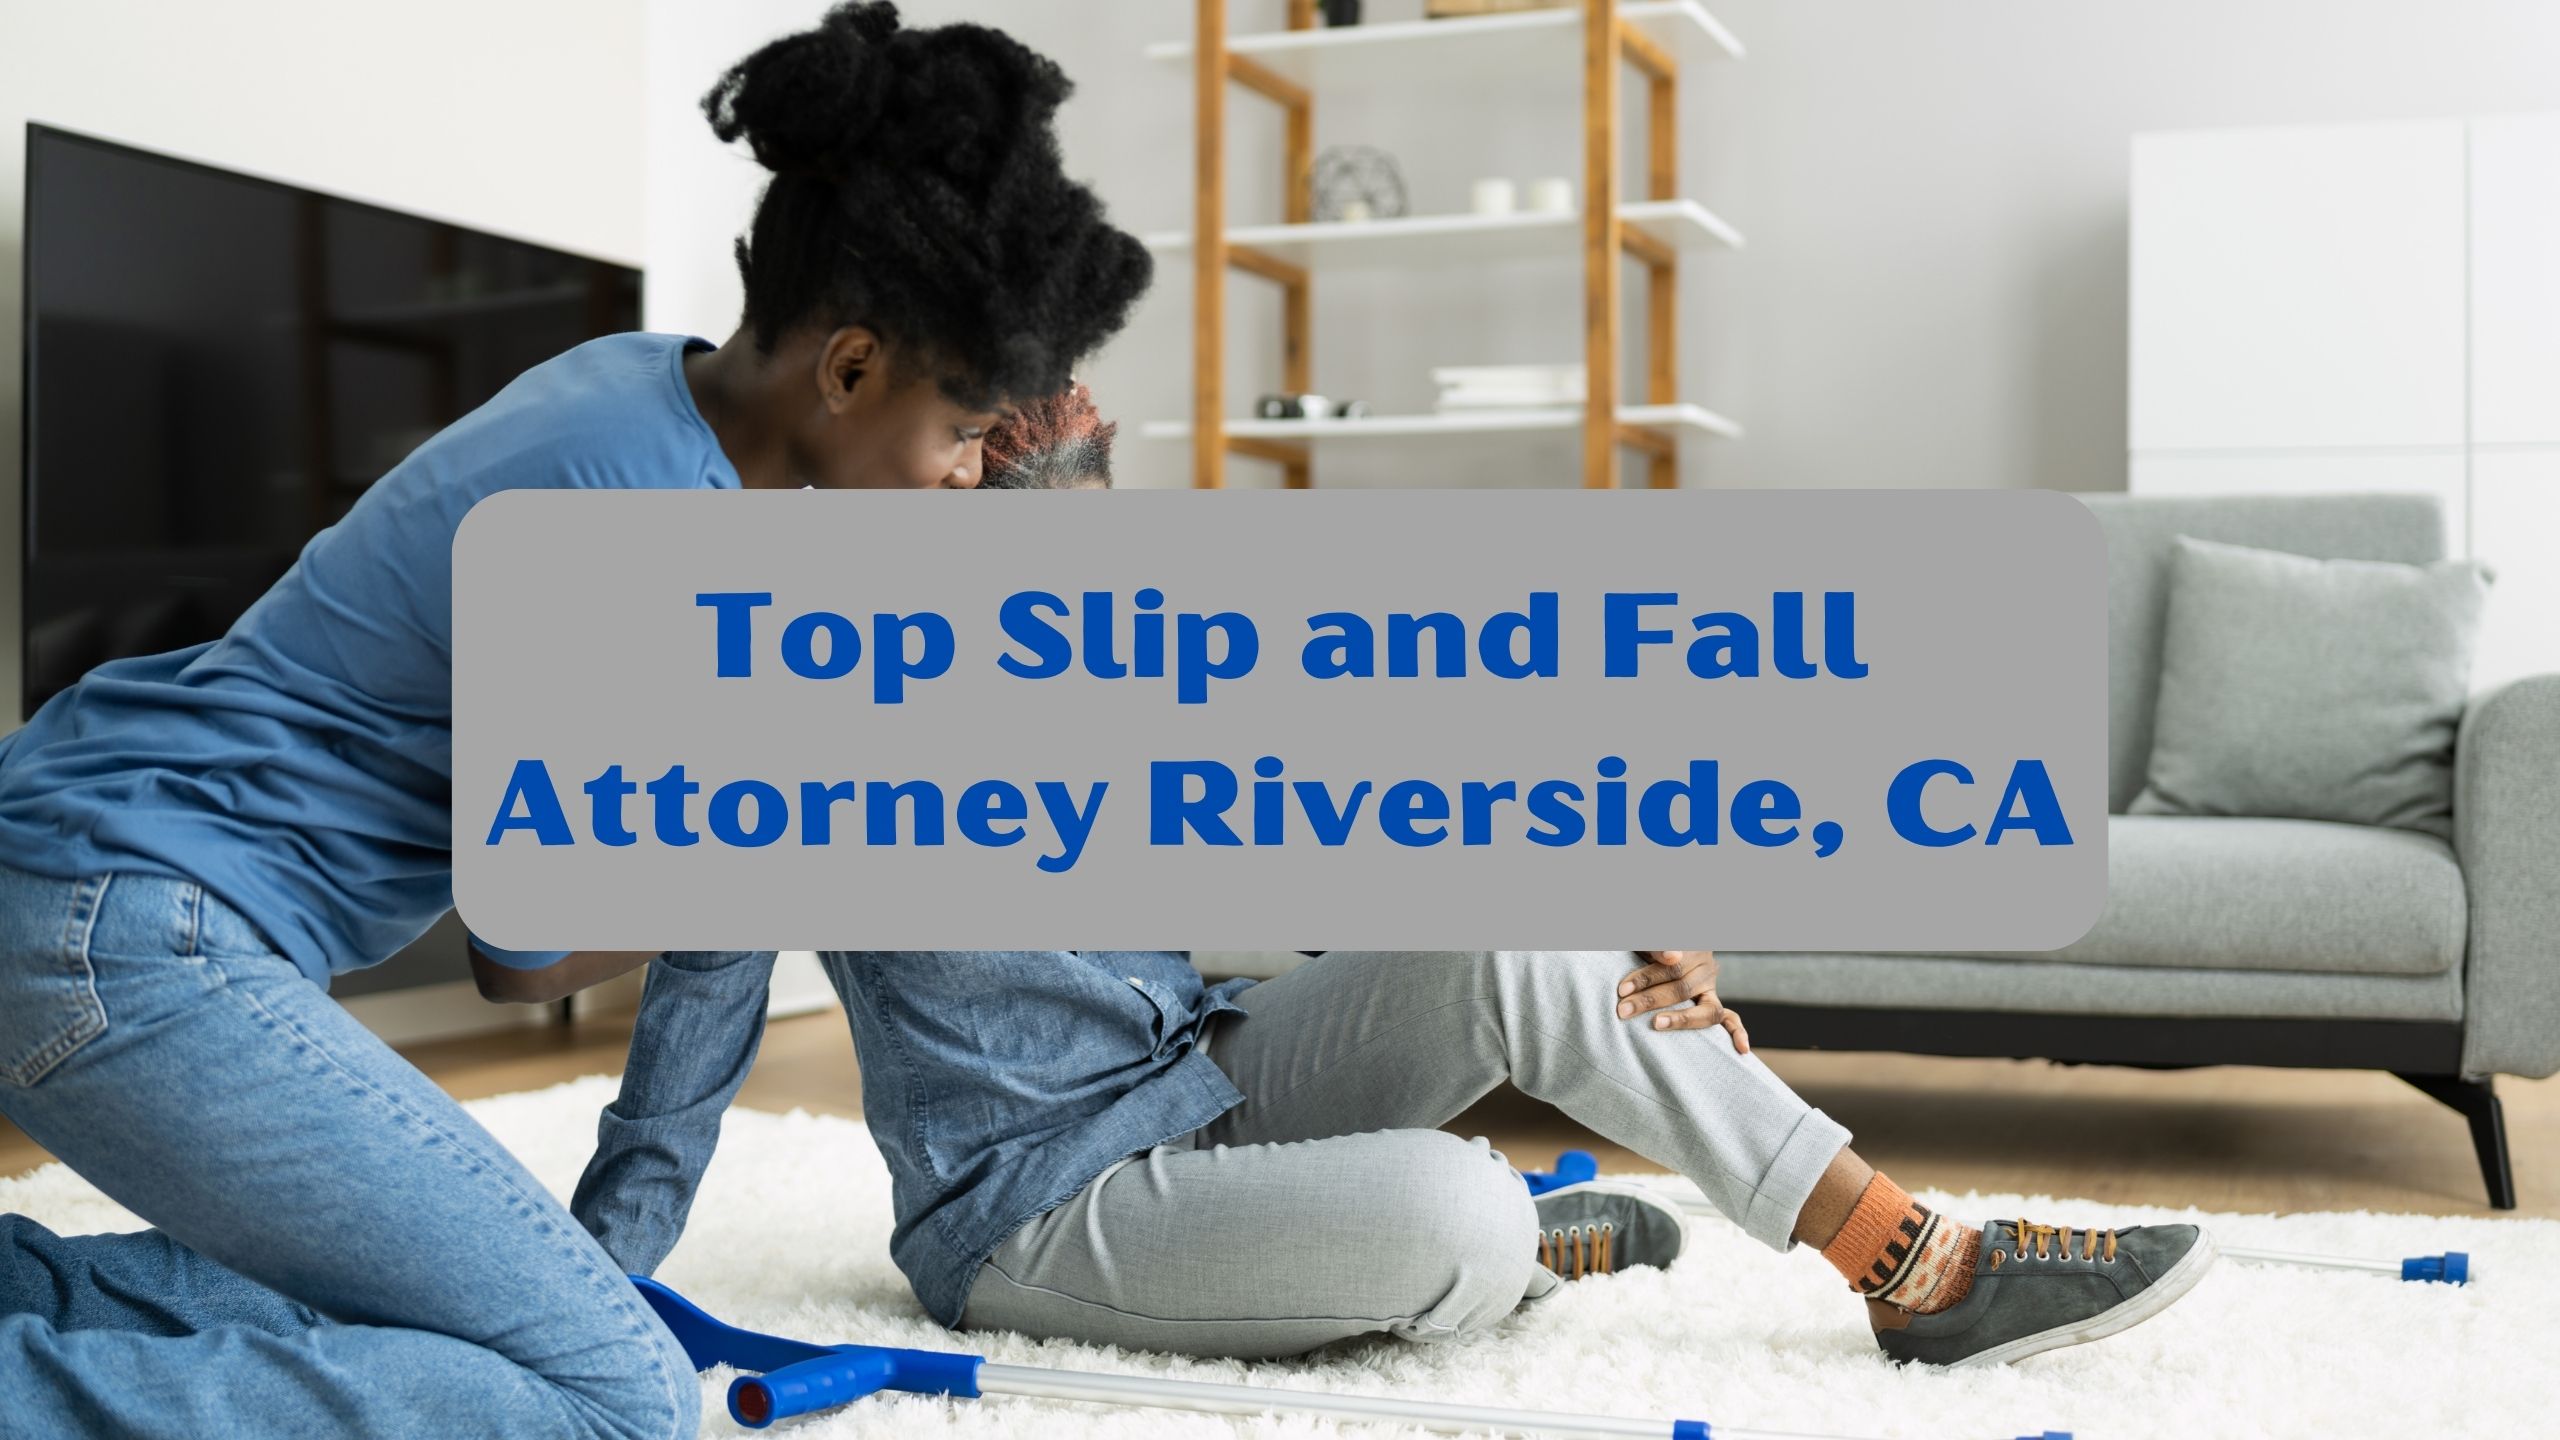 Top Slip and Fall Attorney Riverside